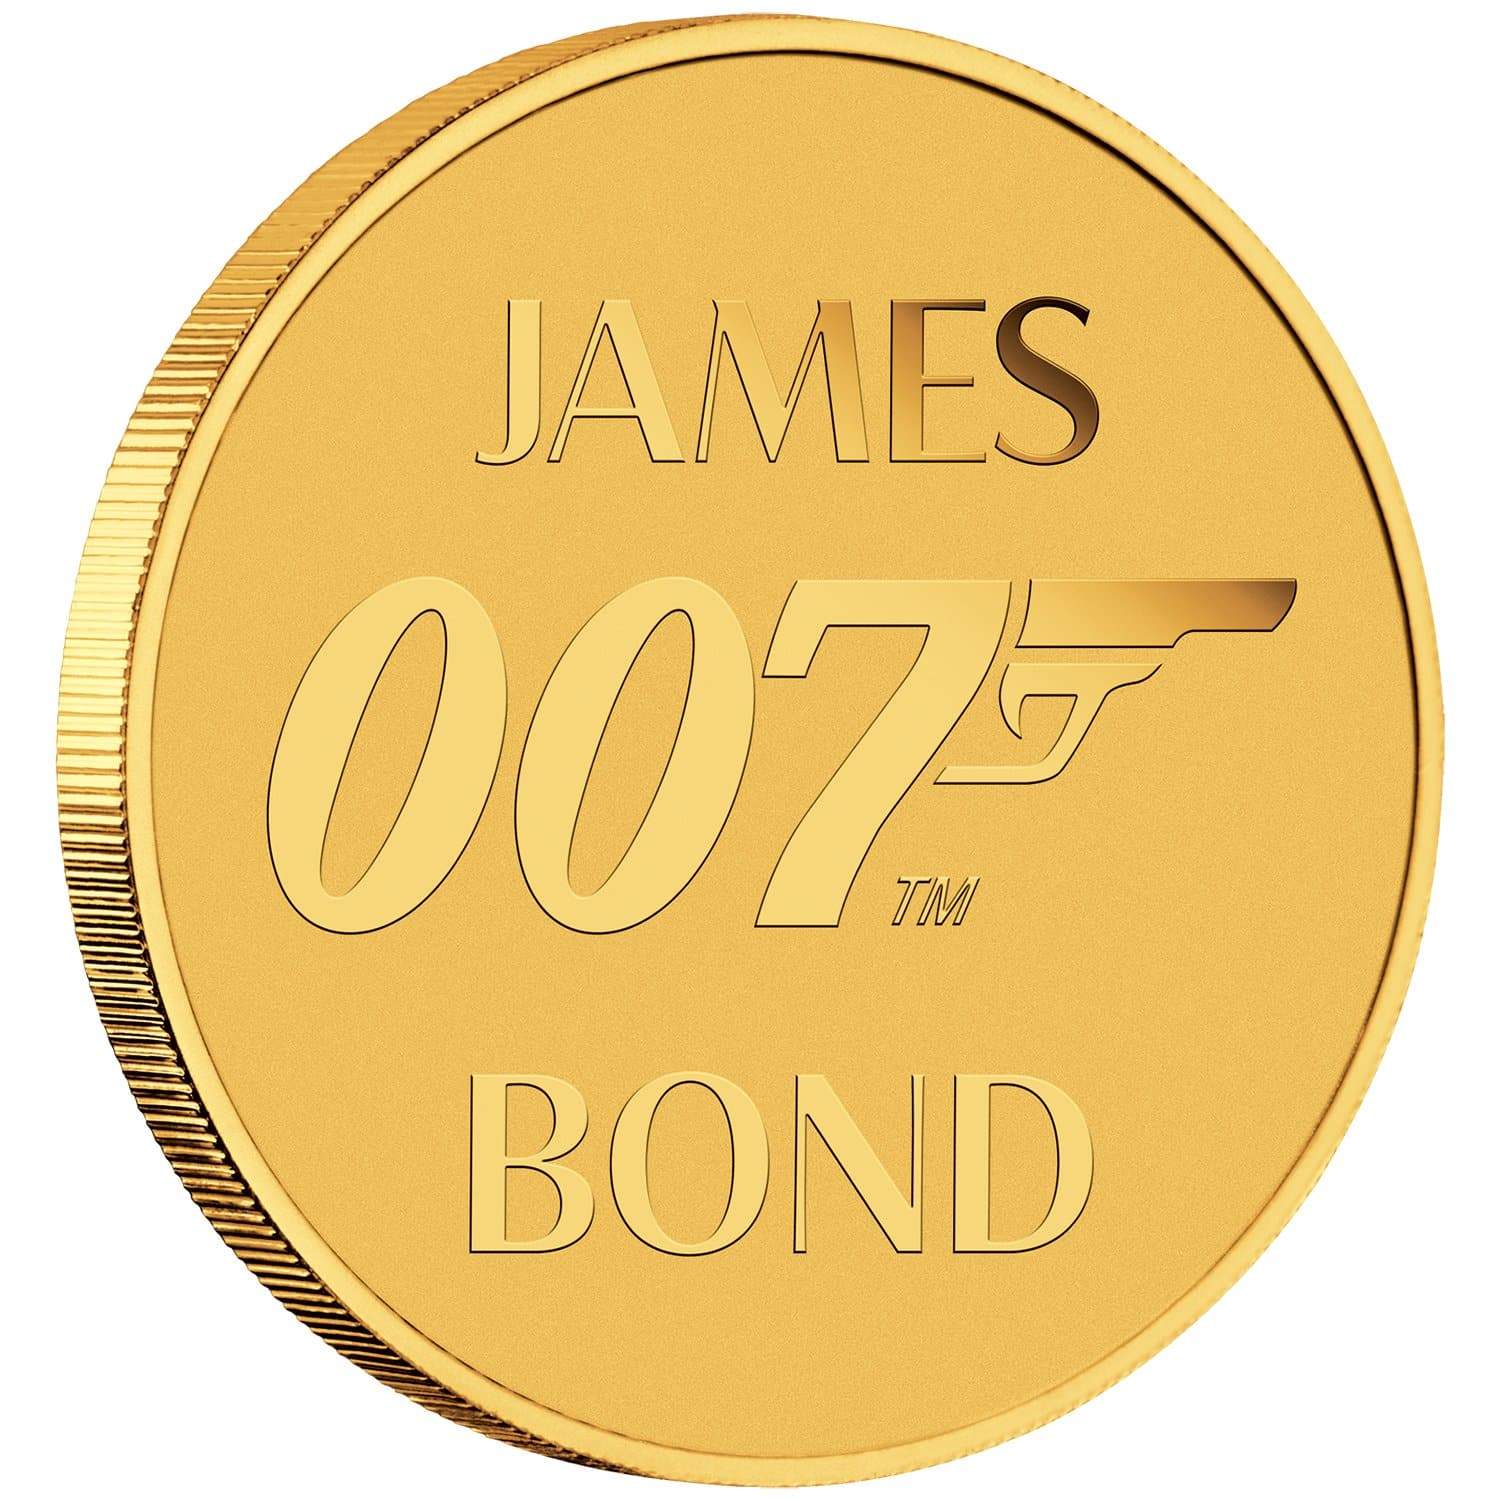 James Bond 0.5g 2021 Gold Coin In Presentation Card - By The Perth Mint Coins PERTH MINT 